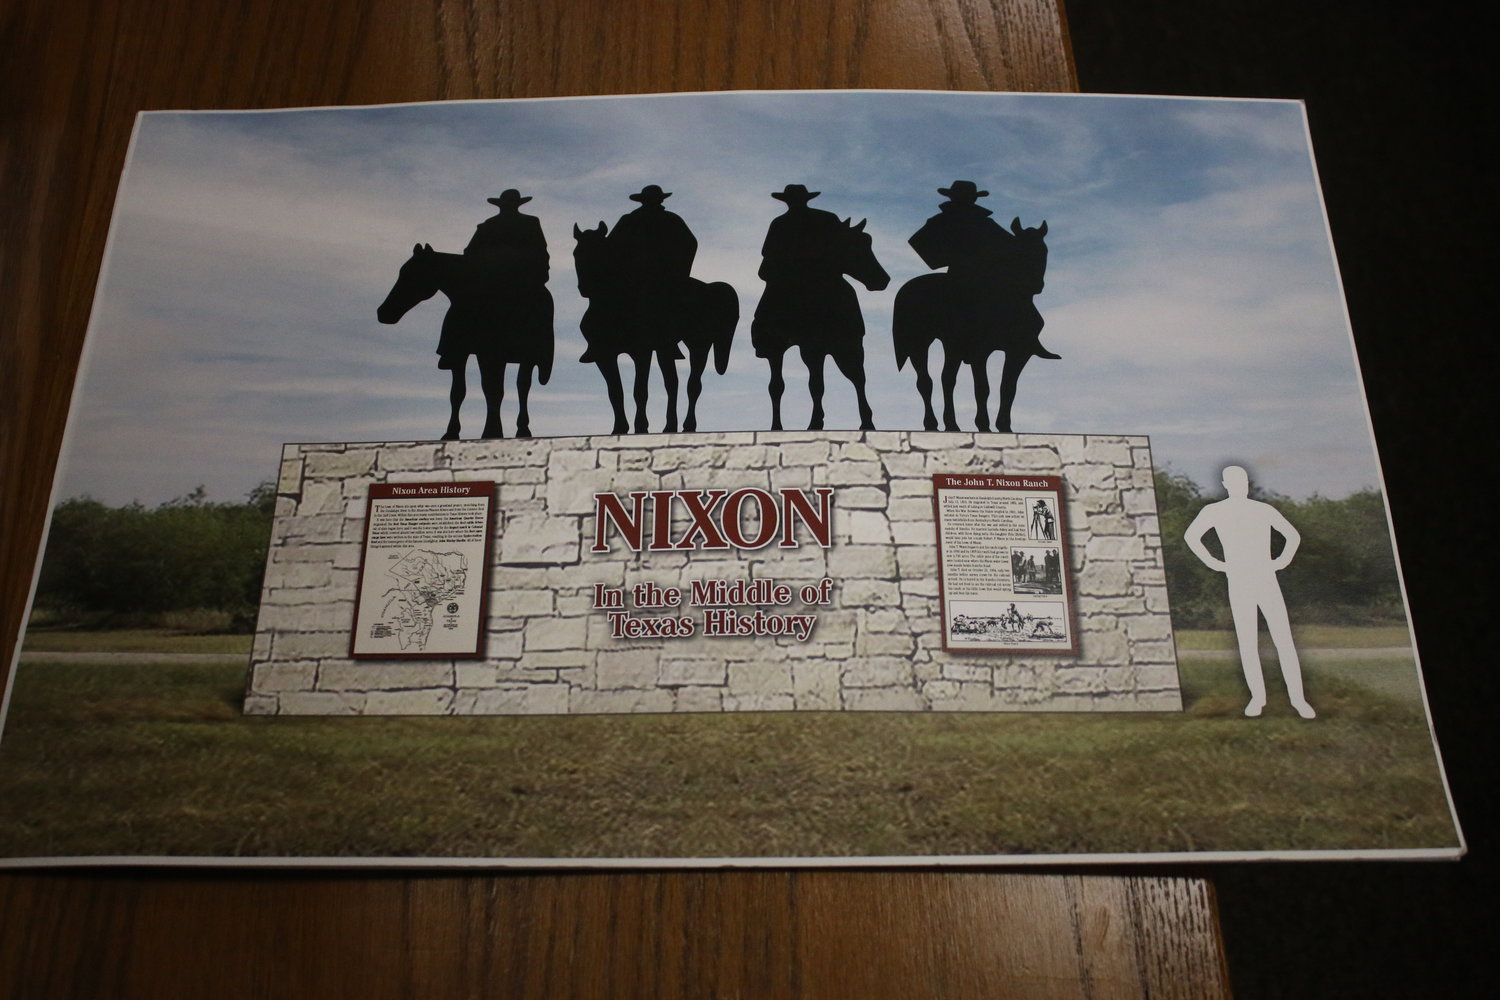 Artist renderings show two possible entrance monuments that would be erected outside a potential Ranch Nixon Historical Association museum to honor the cowboy and ranching heritage of the Nixon area.